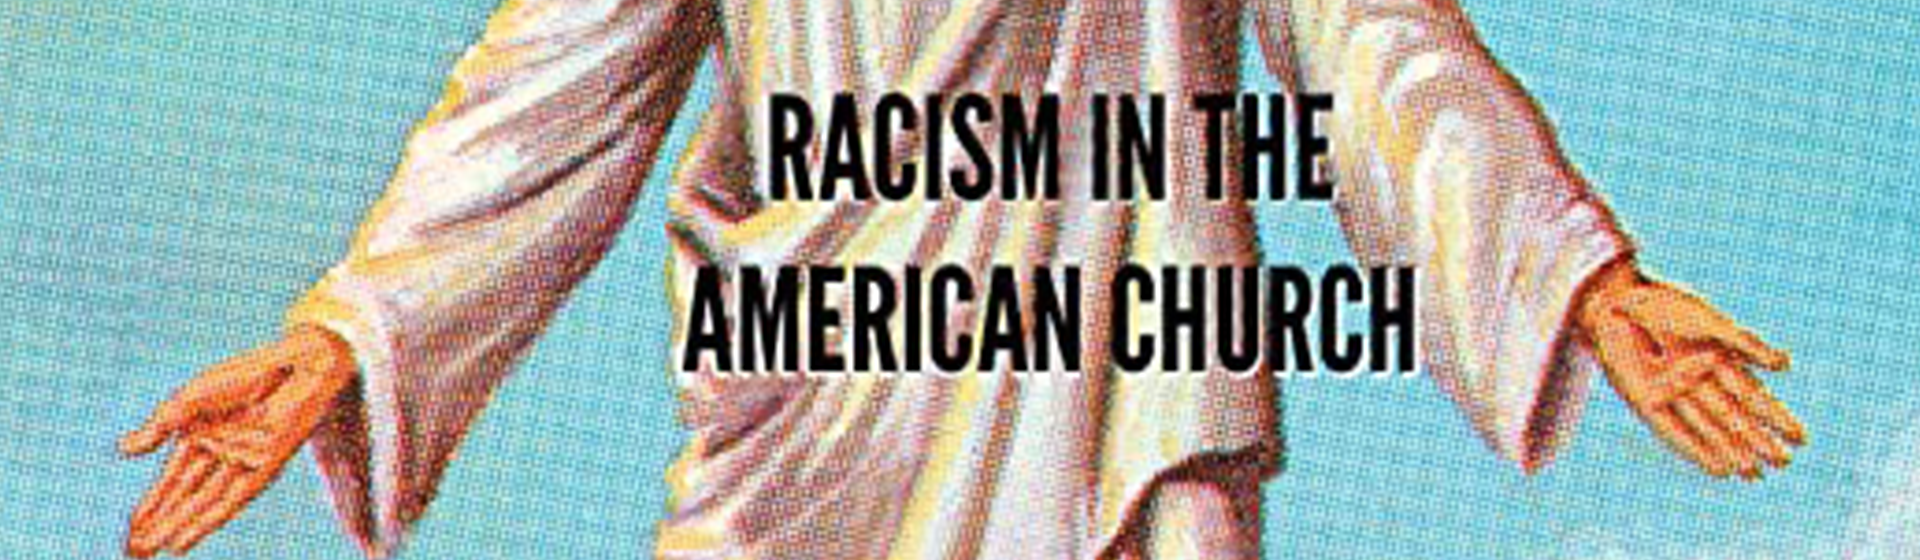 Racism_in_the_American_Church